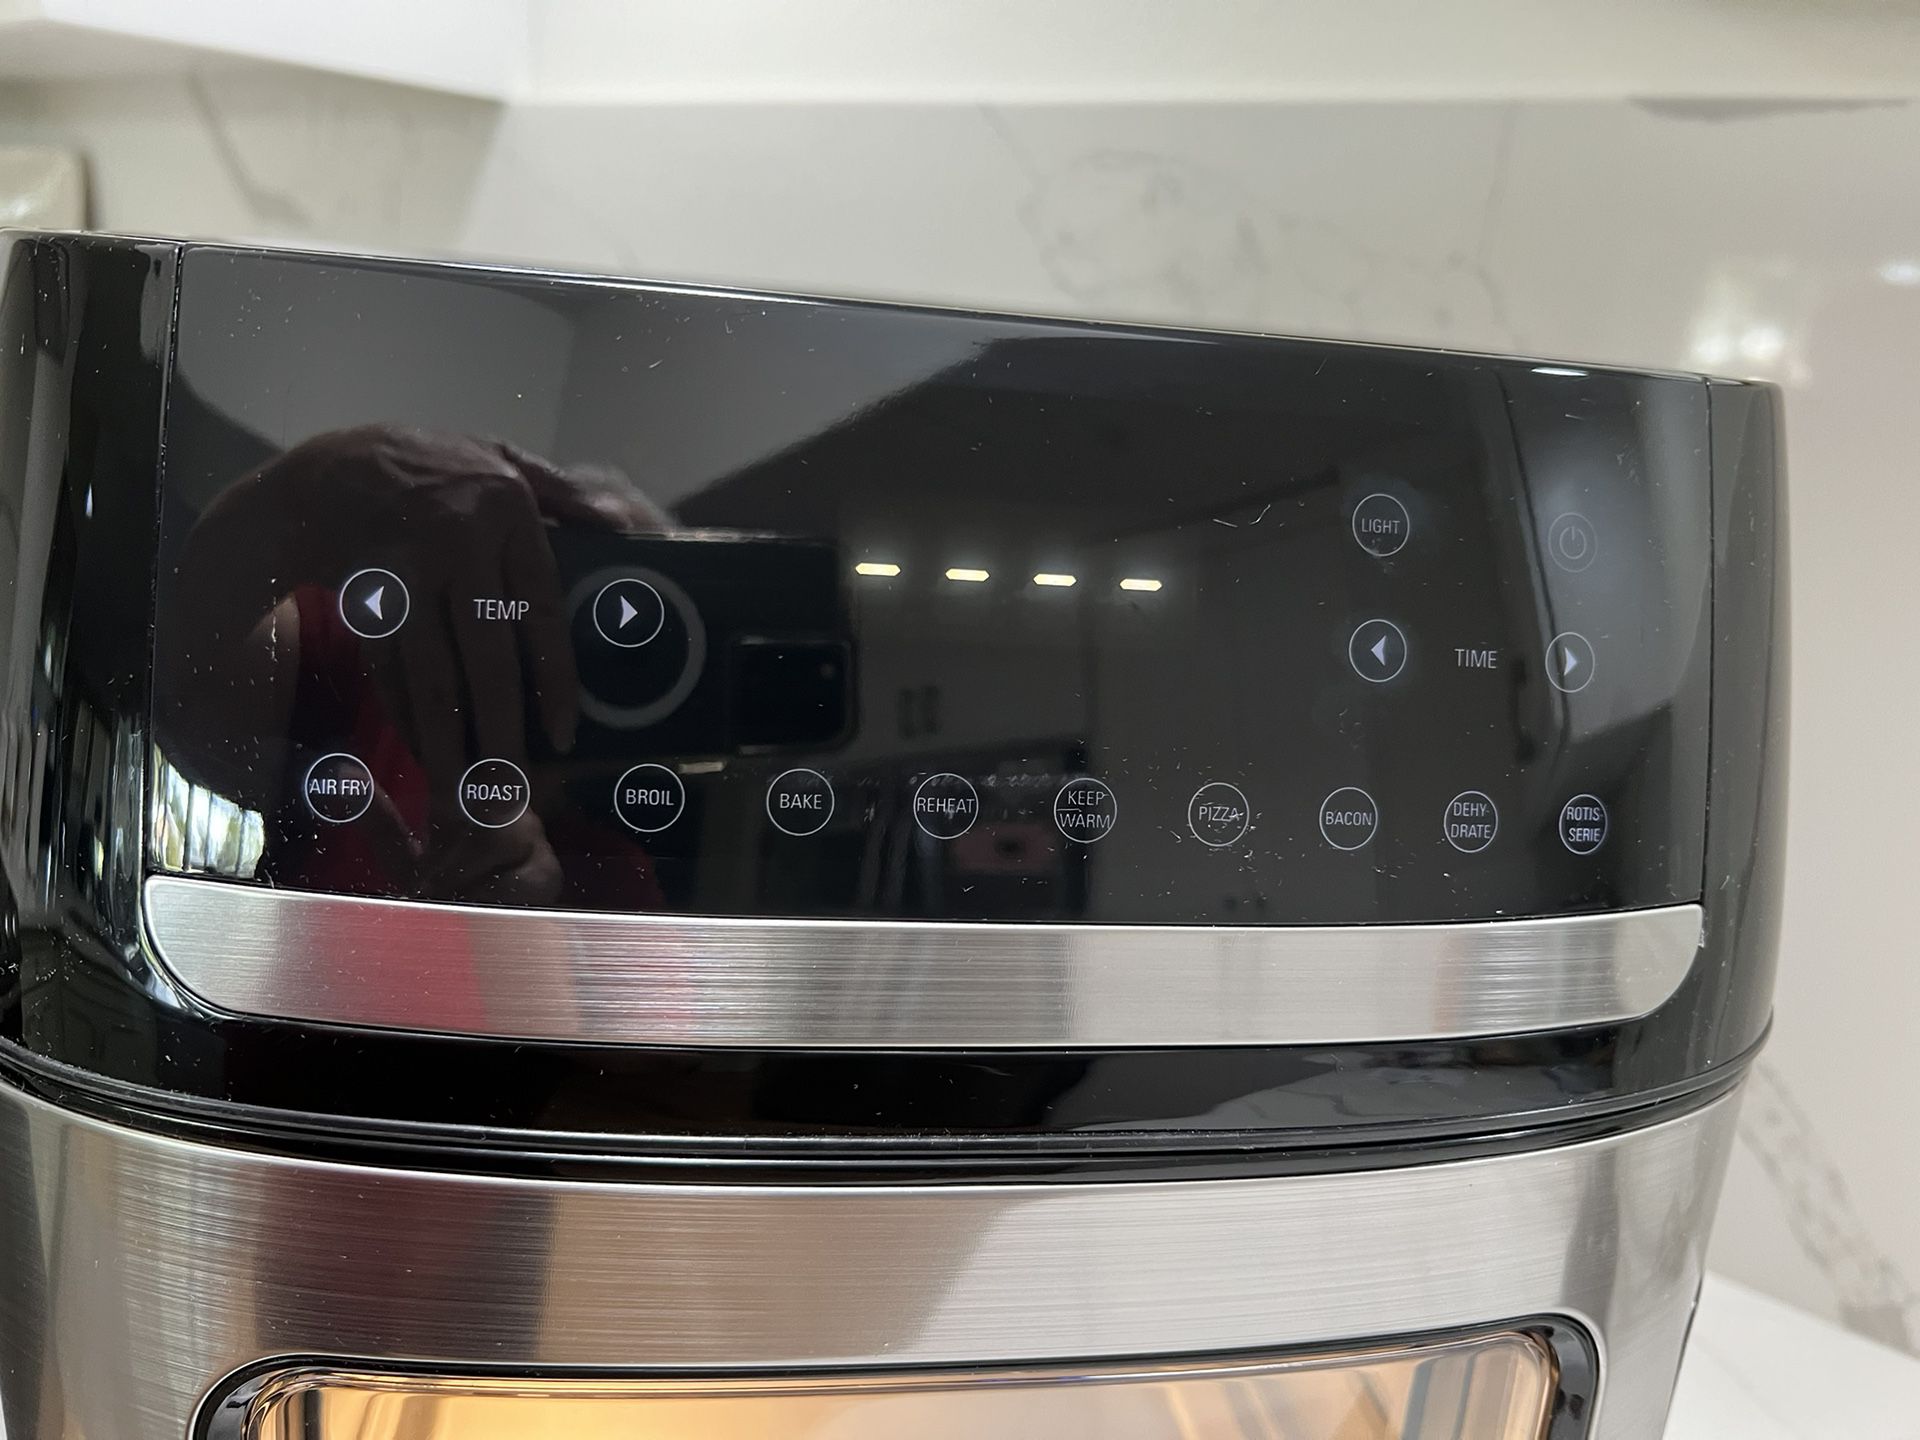 Bella Pro Series - 12.6-gt. Digital Air Fryer Oven - Stainless Steel for  Sale in Long Beach, CA - OfferUp